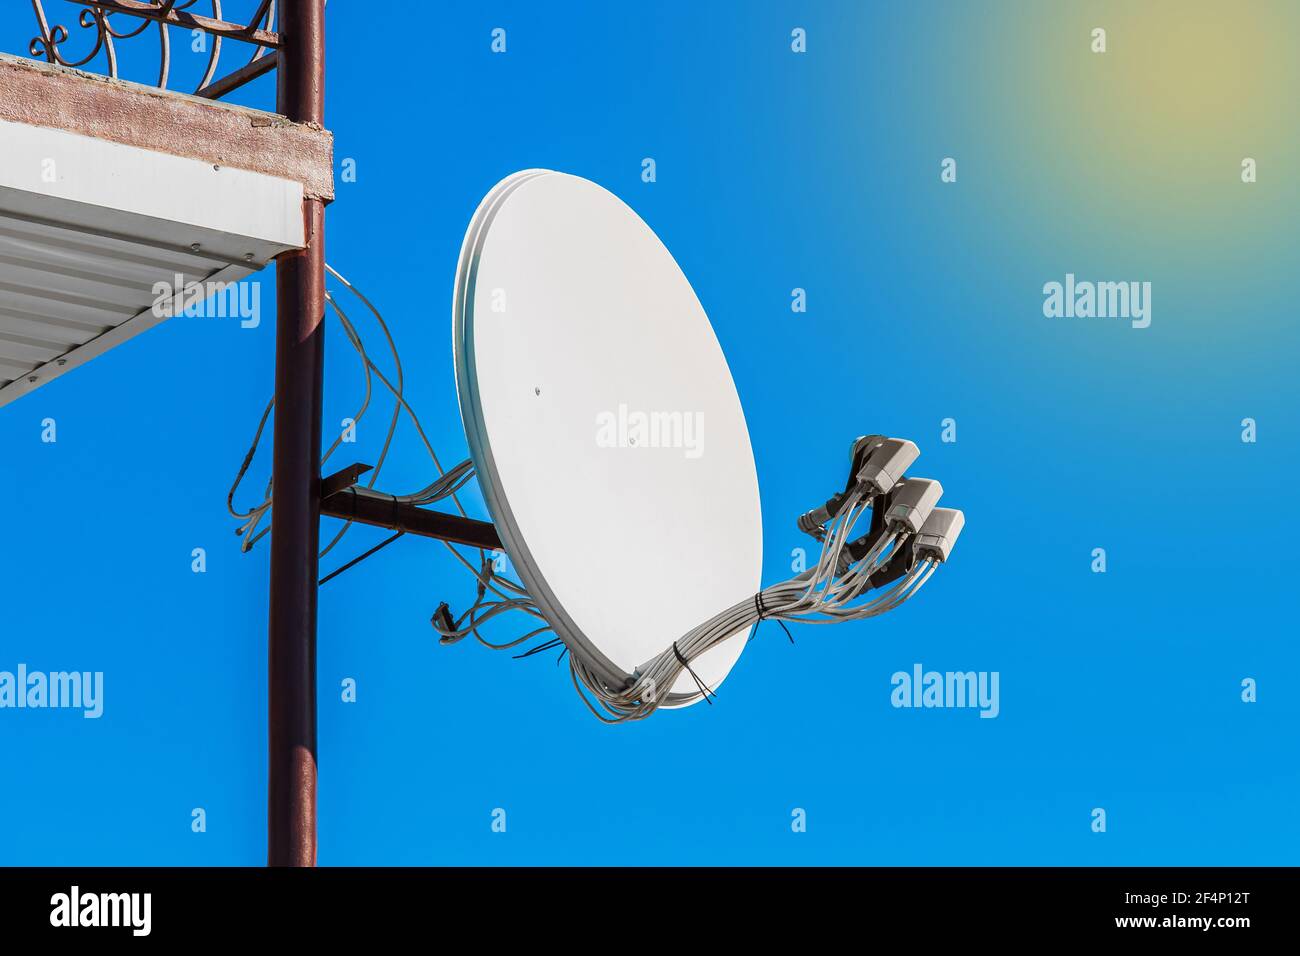 Satellite dish on a part of a building against a blue sky with sunlight and glare. Stock Photo